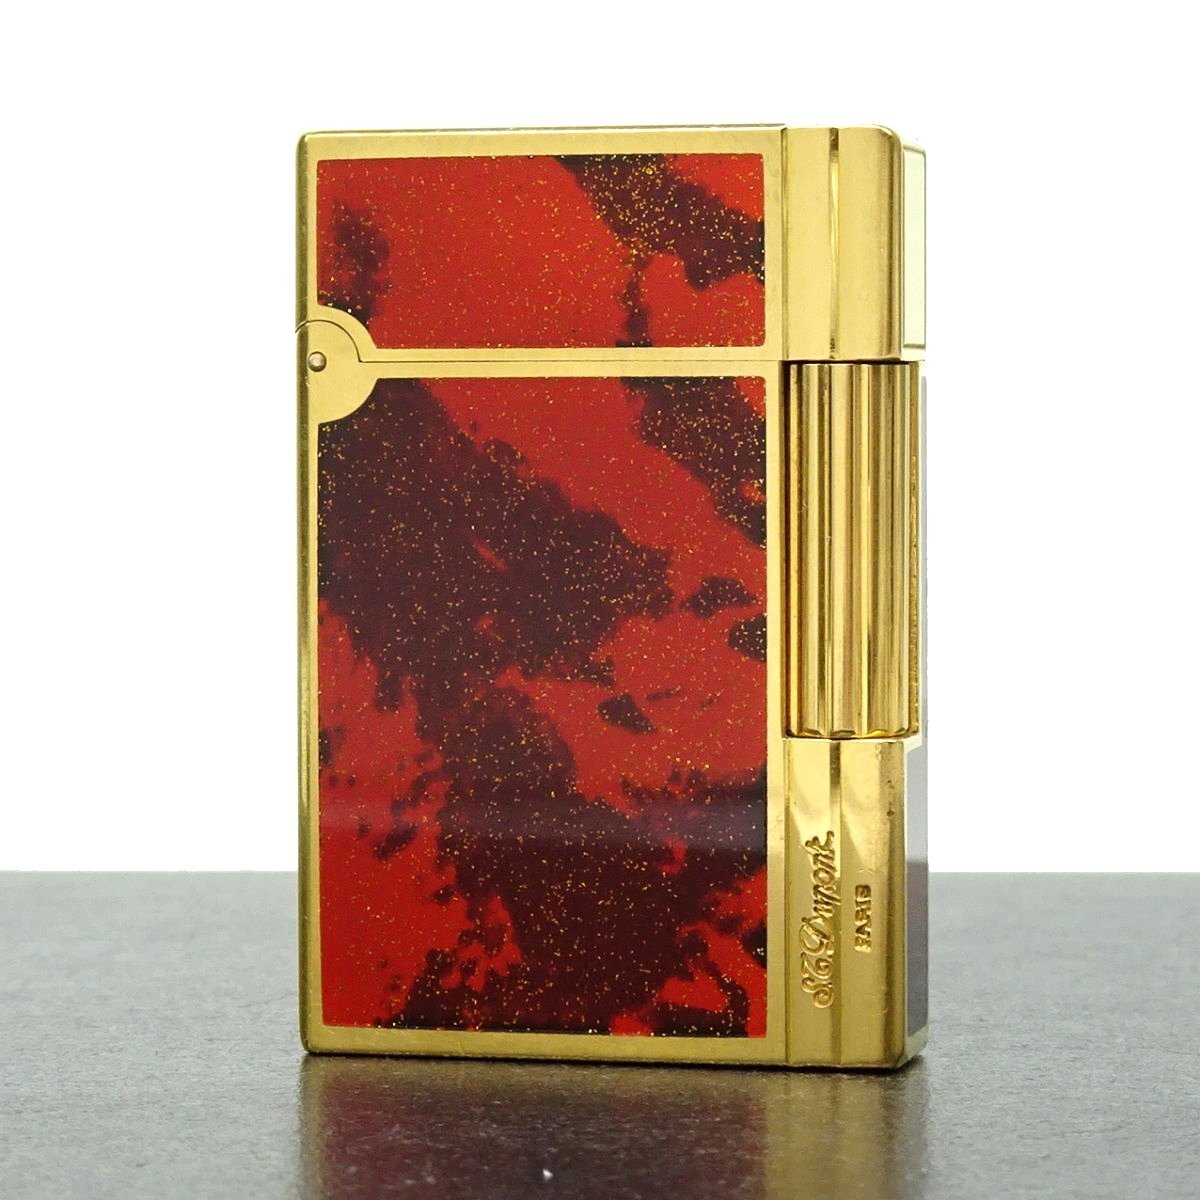 *E2018 Dupont gyatsu Be lacquer gas lighter red brown group x Gold put on fire not yet verification junk treatment S.T.Dupont men's *